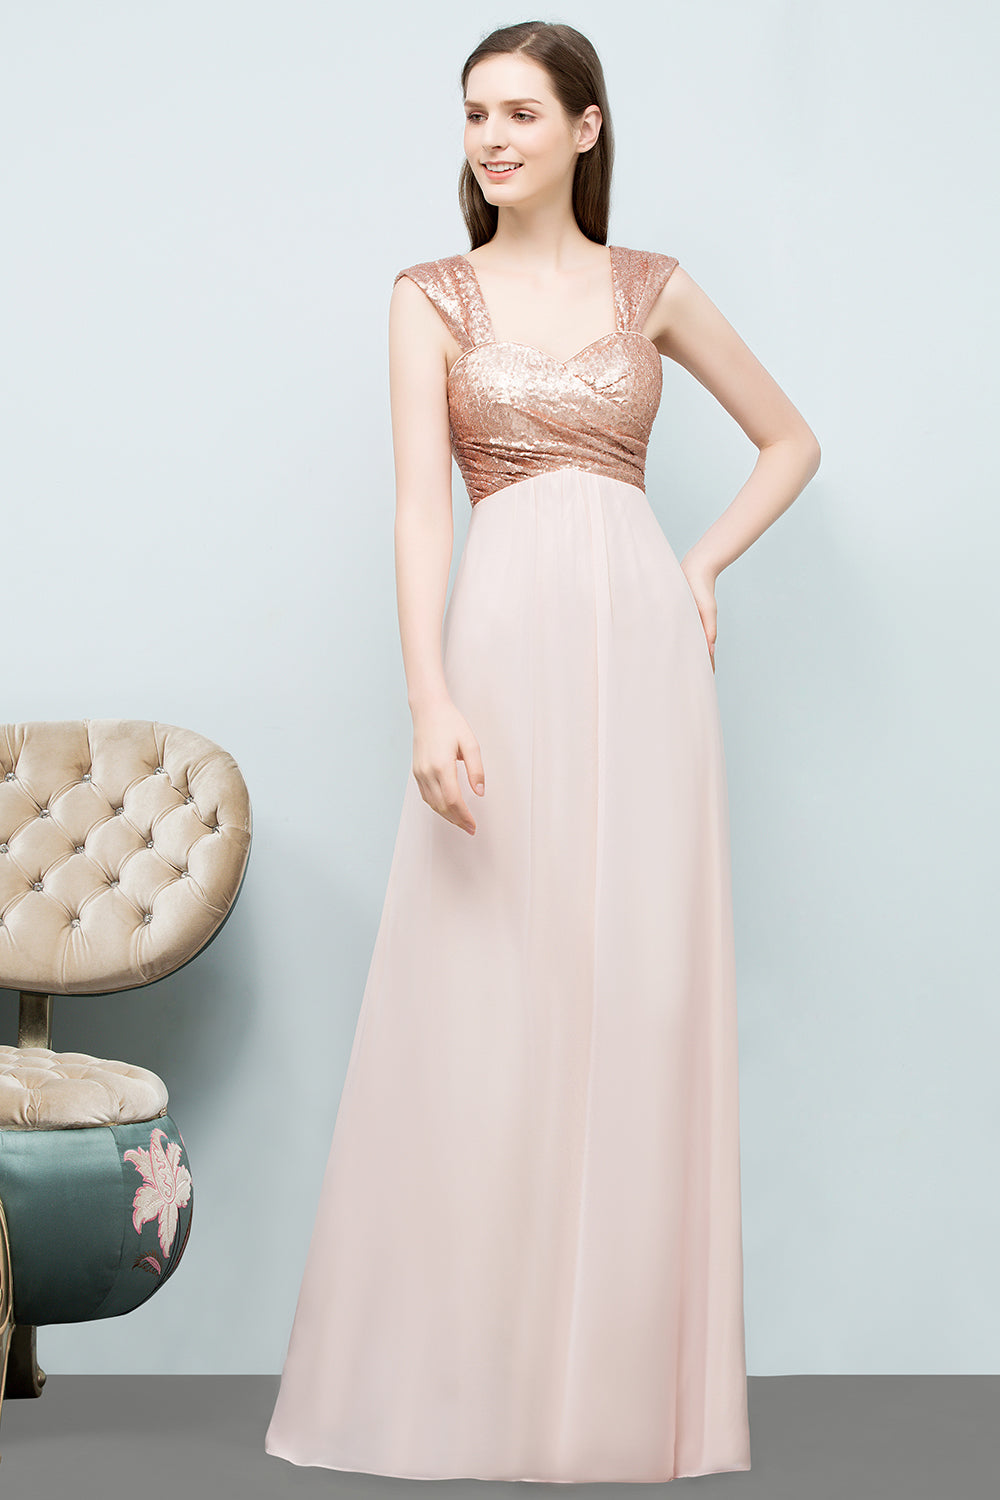 A-line Chiffon Sequins Straps Sweetheart Long Bridesmaid Dresses with Sleeves-BIZTUNNEL